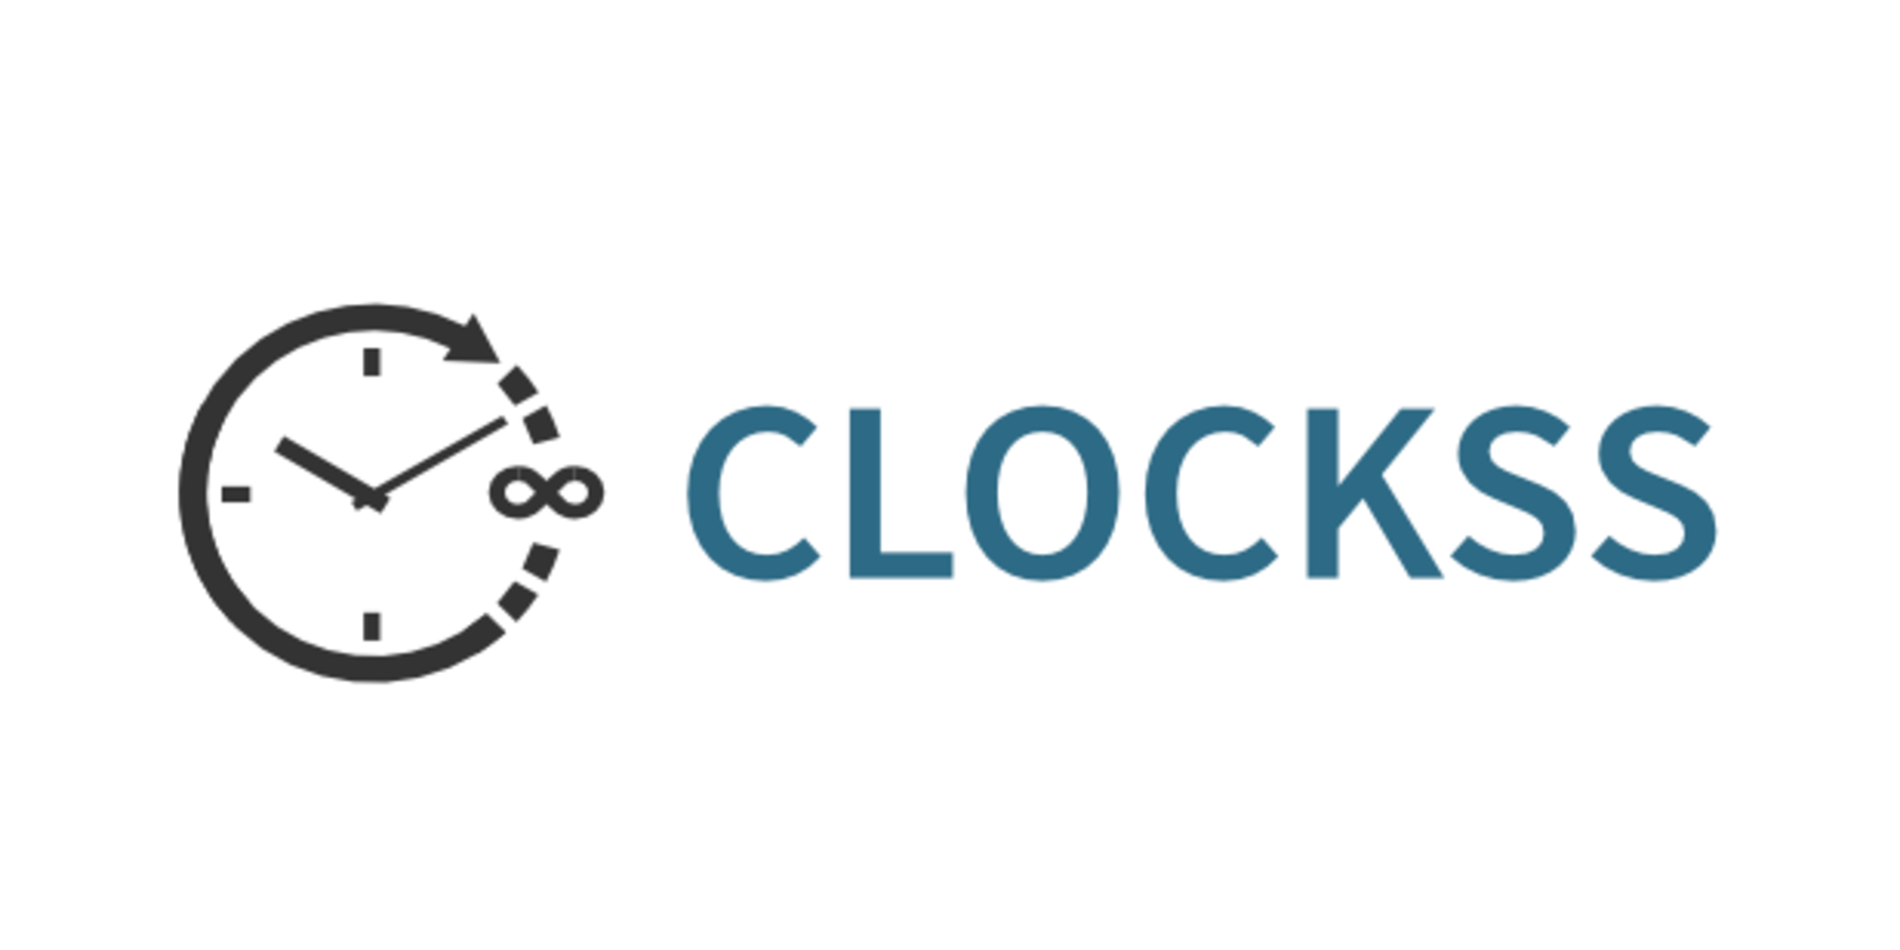 Logo of the CLOCKSS Archive, consisting of an analog clock design showing approximately 10:10 o'clock and an infinity sign where the 3 should be, next to the work mark "CLOCKSS"